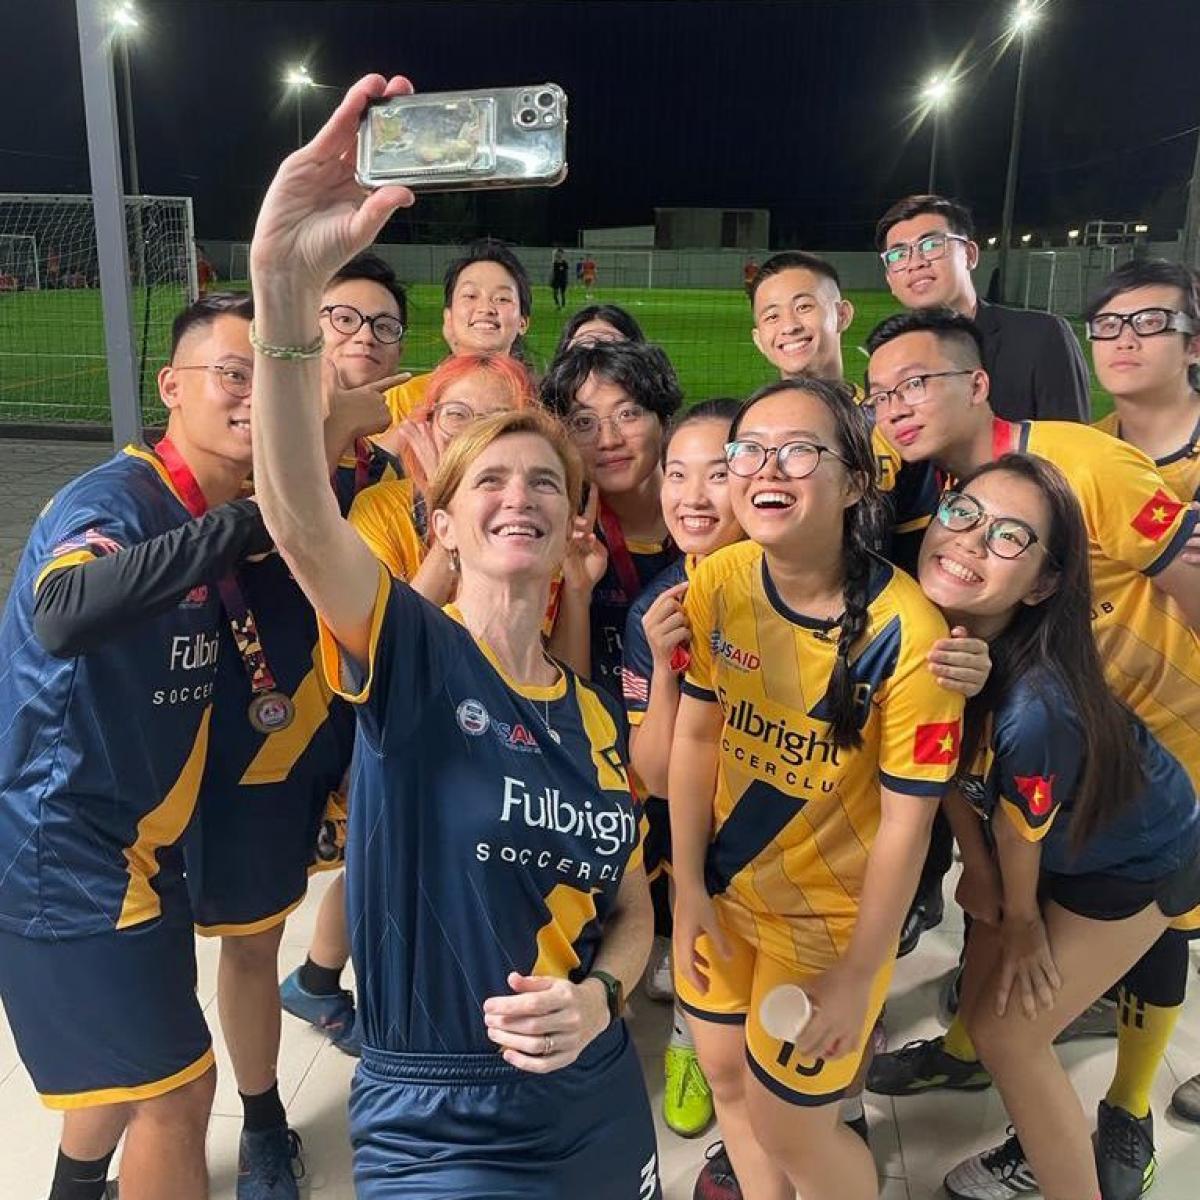 Administrator Power joined students from Fulbright University Vietnam (FUV), the nation’s first independent, nonprofit university, for a soccer scrimmage and was joined by Trần Thị Thùy Trang, a member of the Vietnamese national women’s football team.